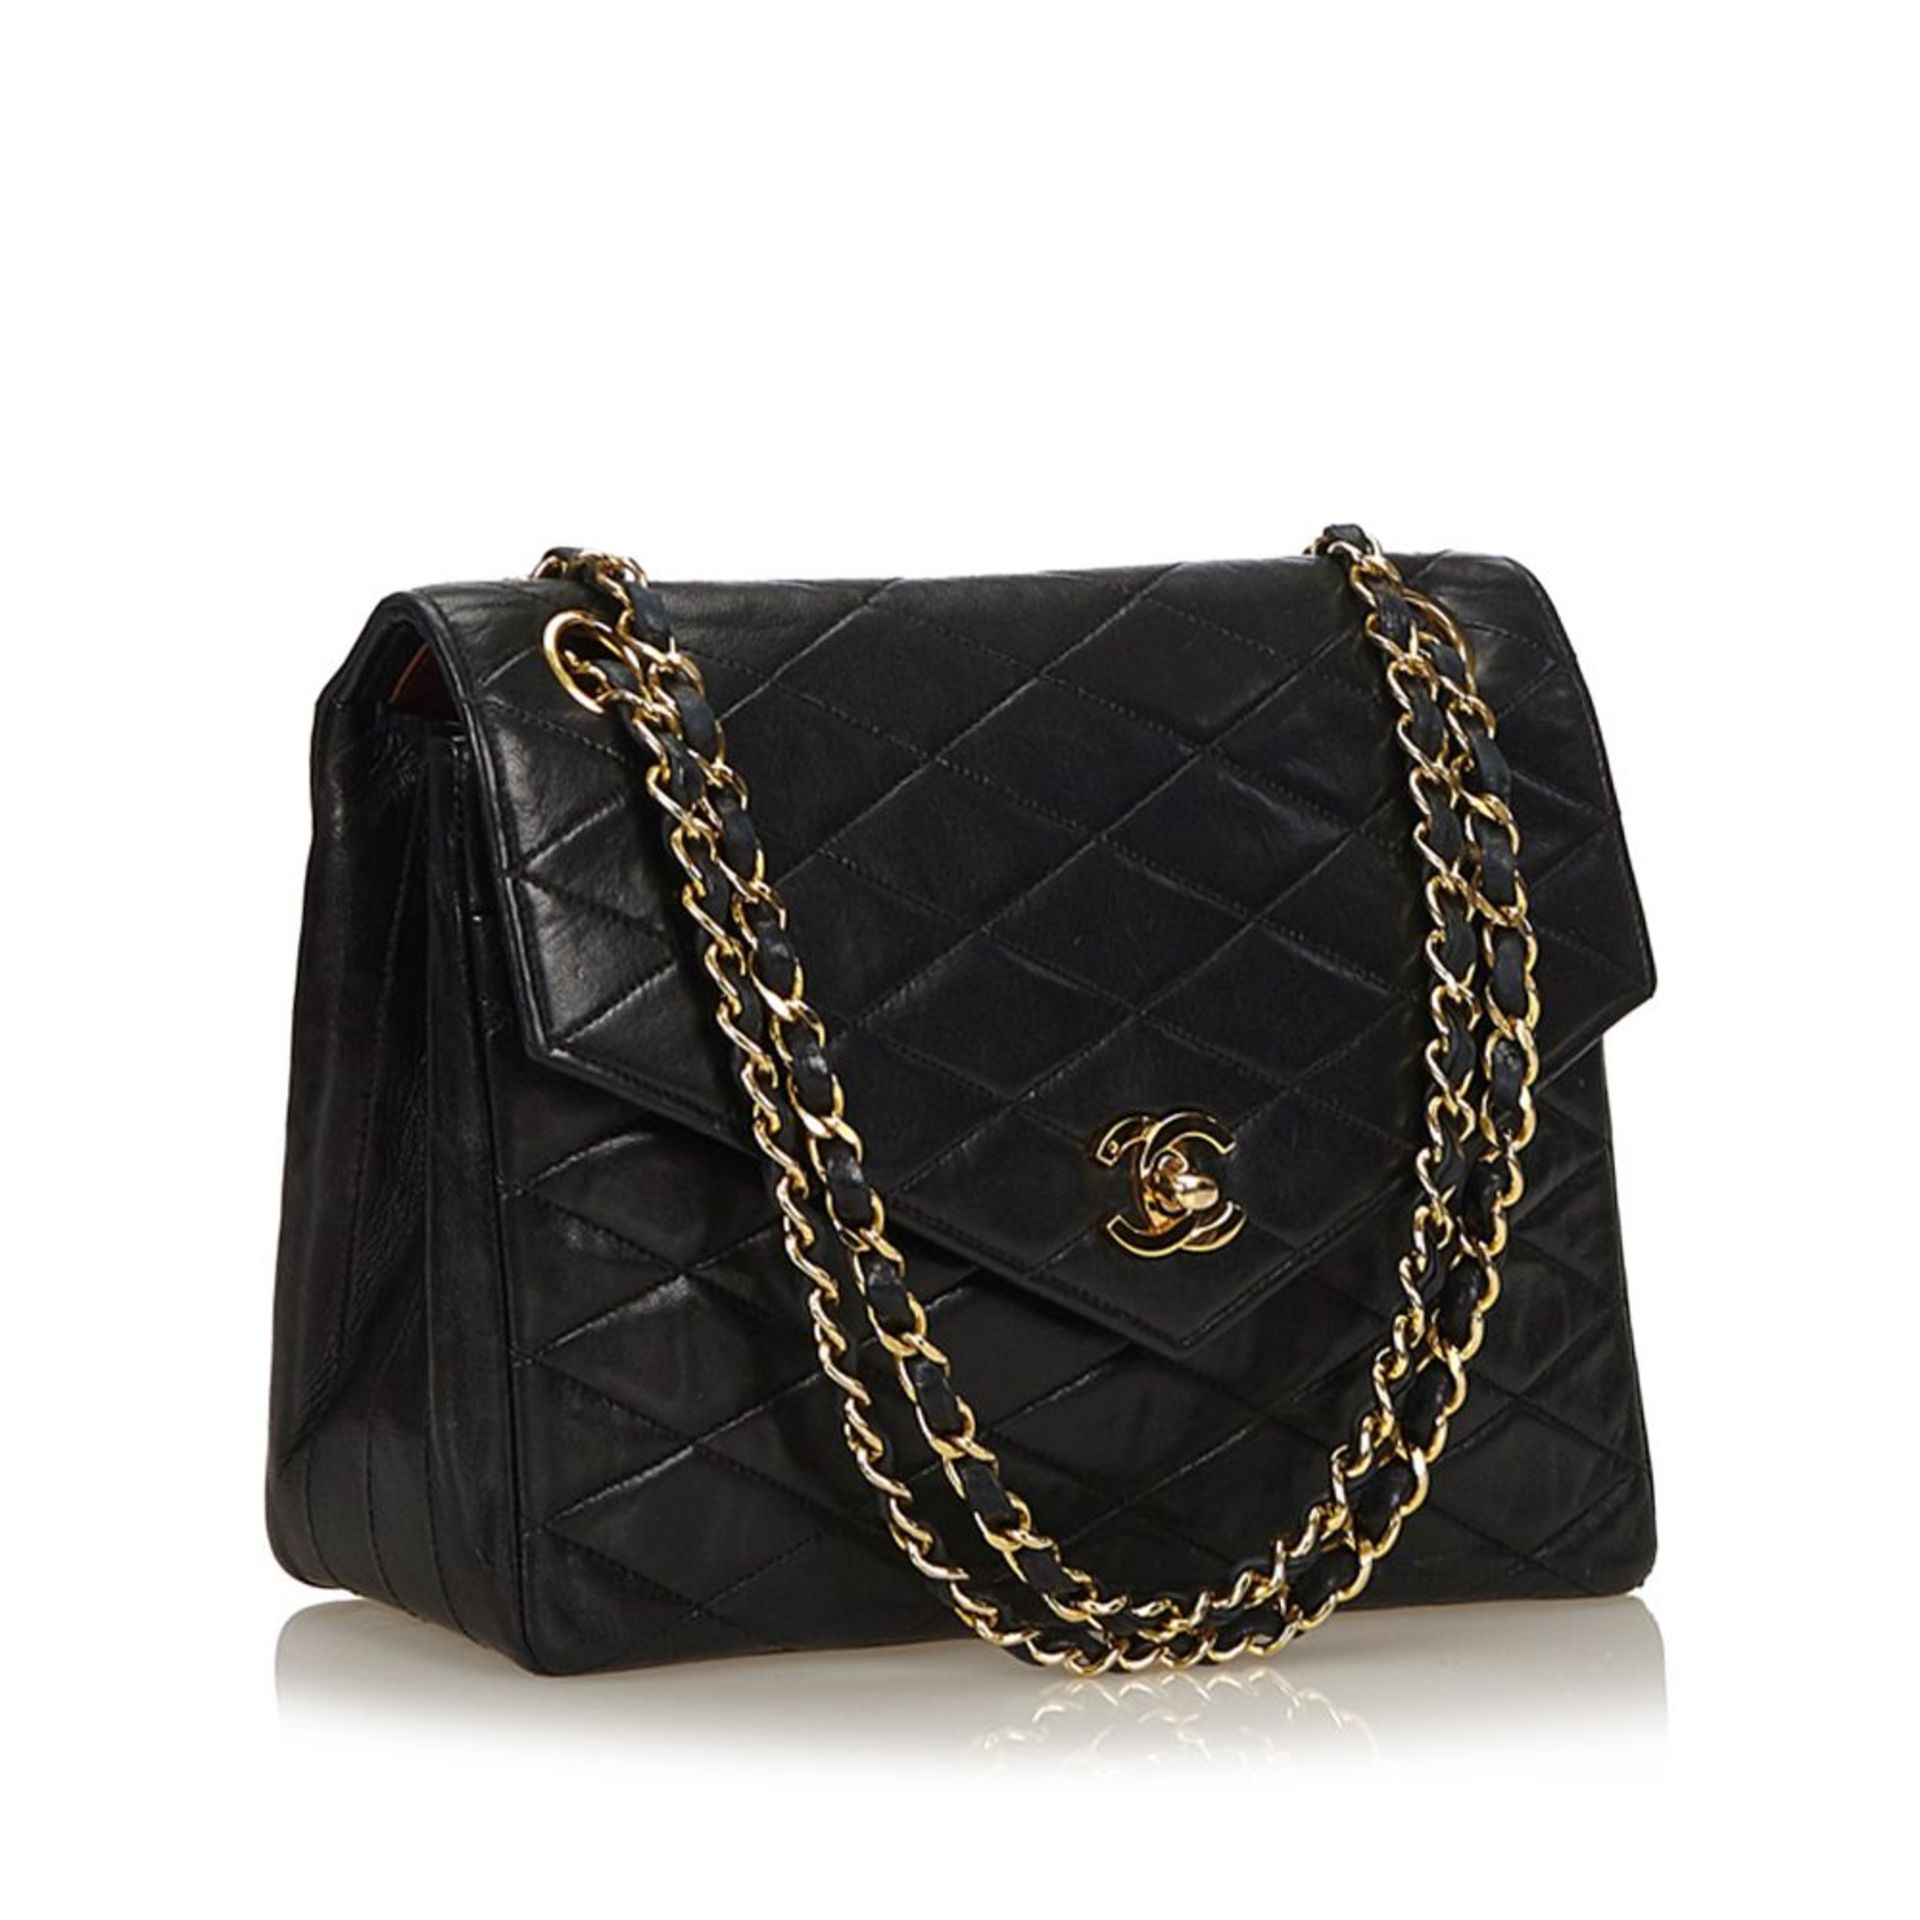 A Chanel matelassé leather chain flap bag,featuring a leather body, exterior back open pocket, - Image 2 of 5